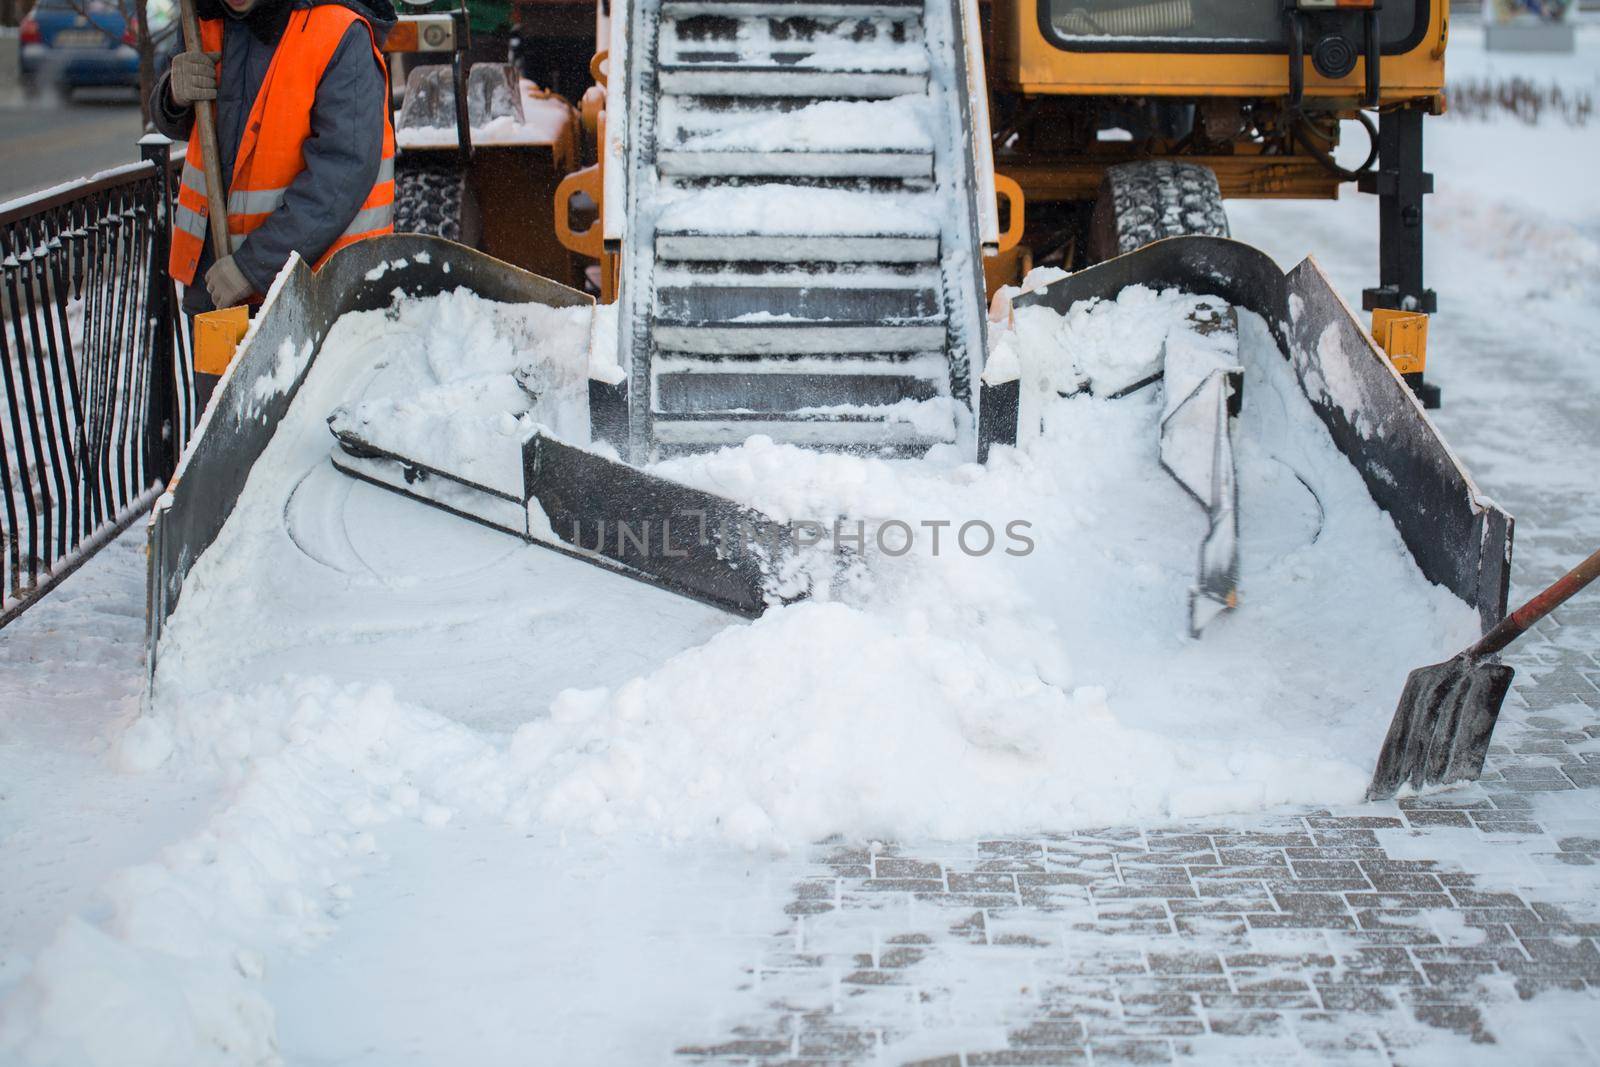 Tractor cleaning the road from the snow. Excavator cleans the streets of large amounts of snow in city. Workers sweep snow from road in winter, Cleaning road from snow storm by StudioPeace